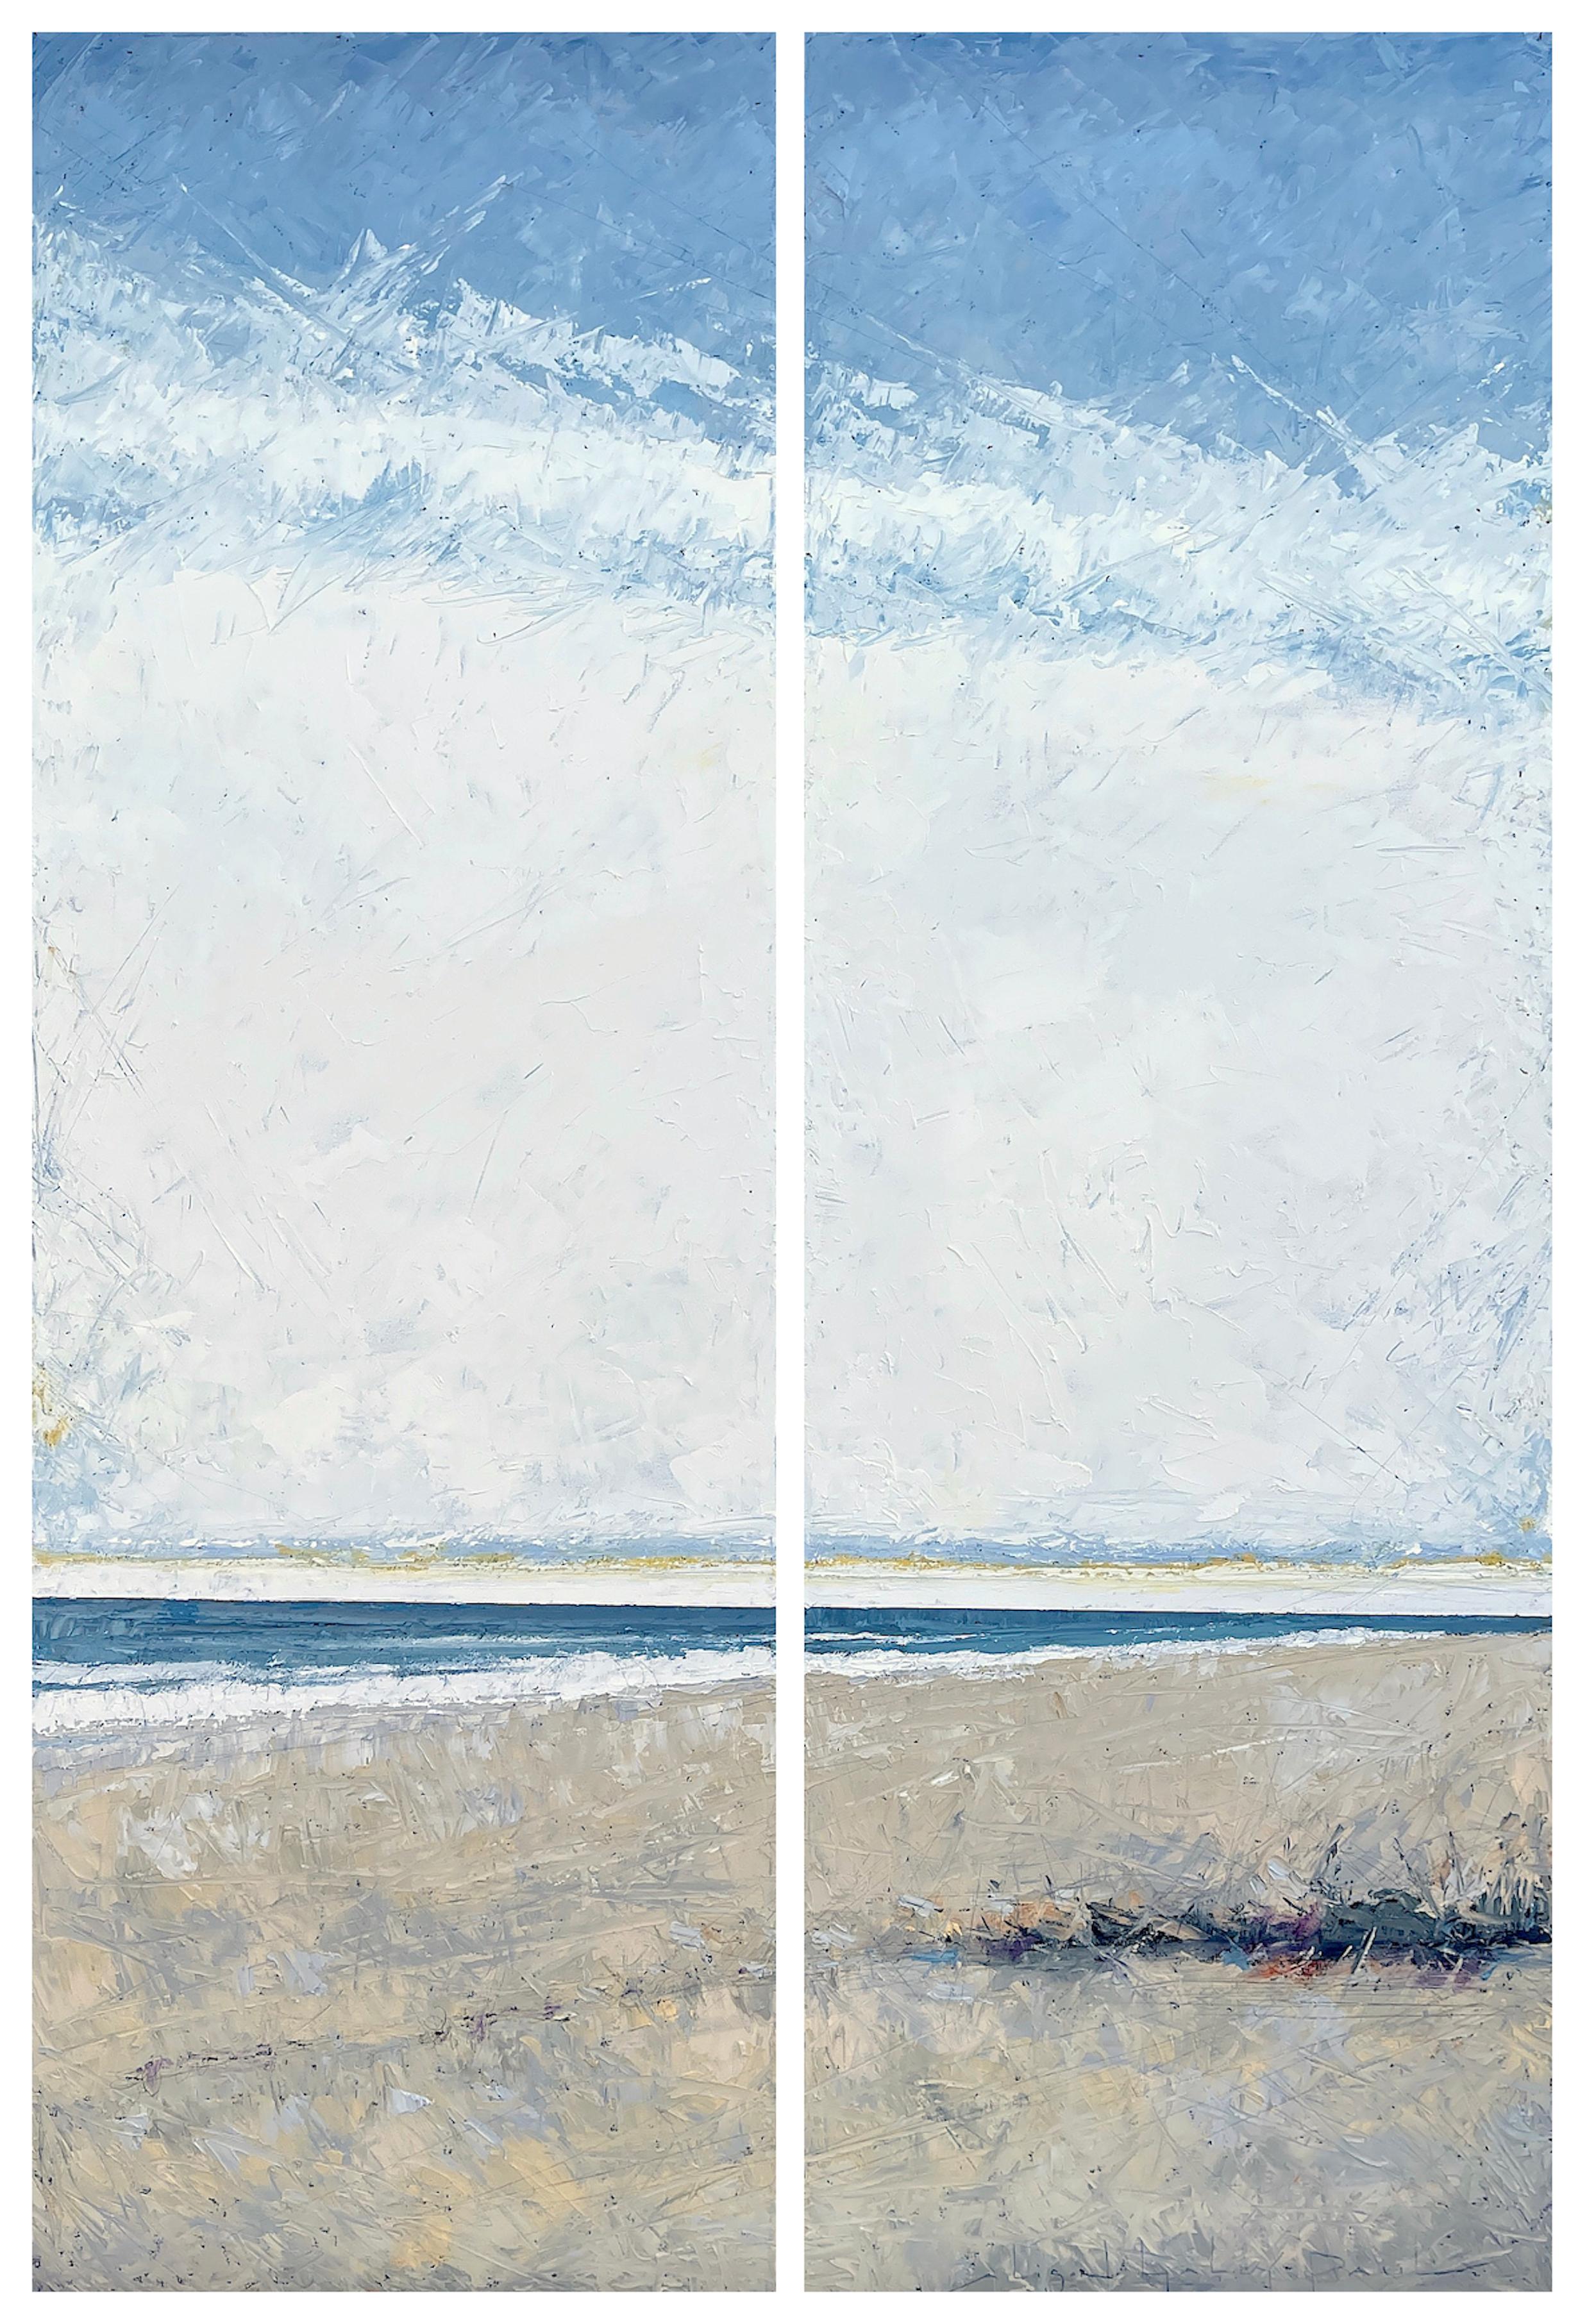 Continuing- diptych